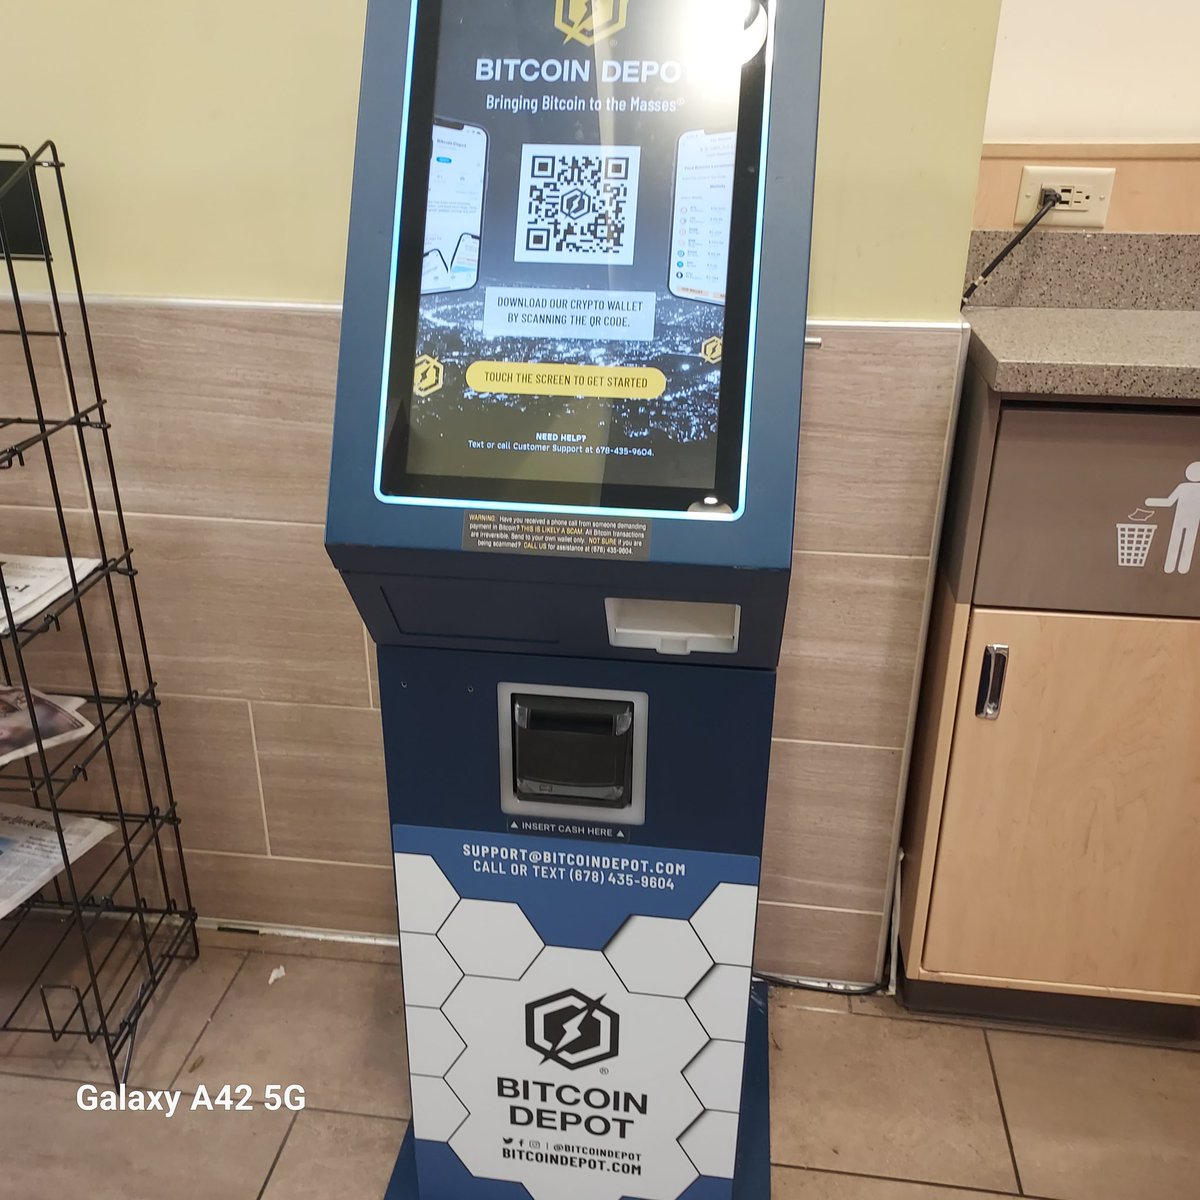 For those that don't have much conviction in #crypto, take a look at this machine that I saw in #CumberlandFarms. The morethe general public sees things like this the more they're going to begin investing. Money will pump from #Btc to $eth and then to solid tokens like $hold.